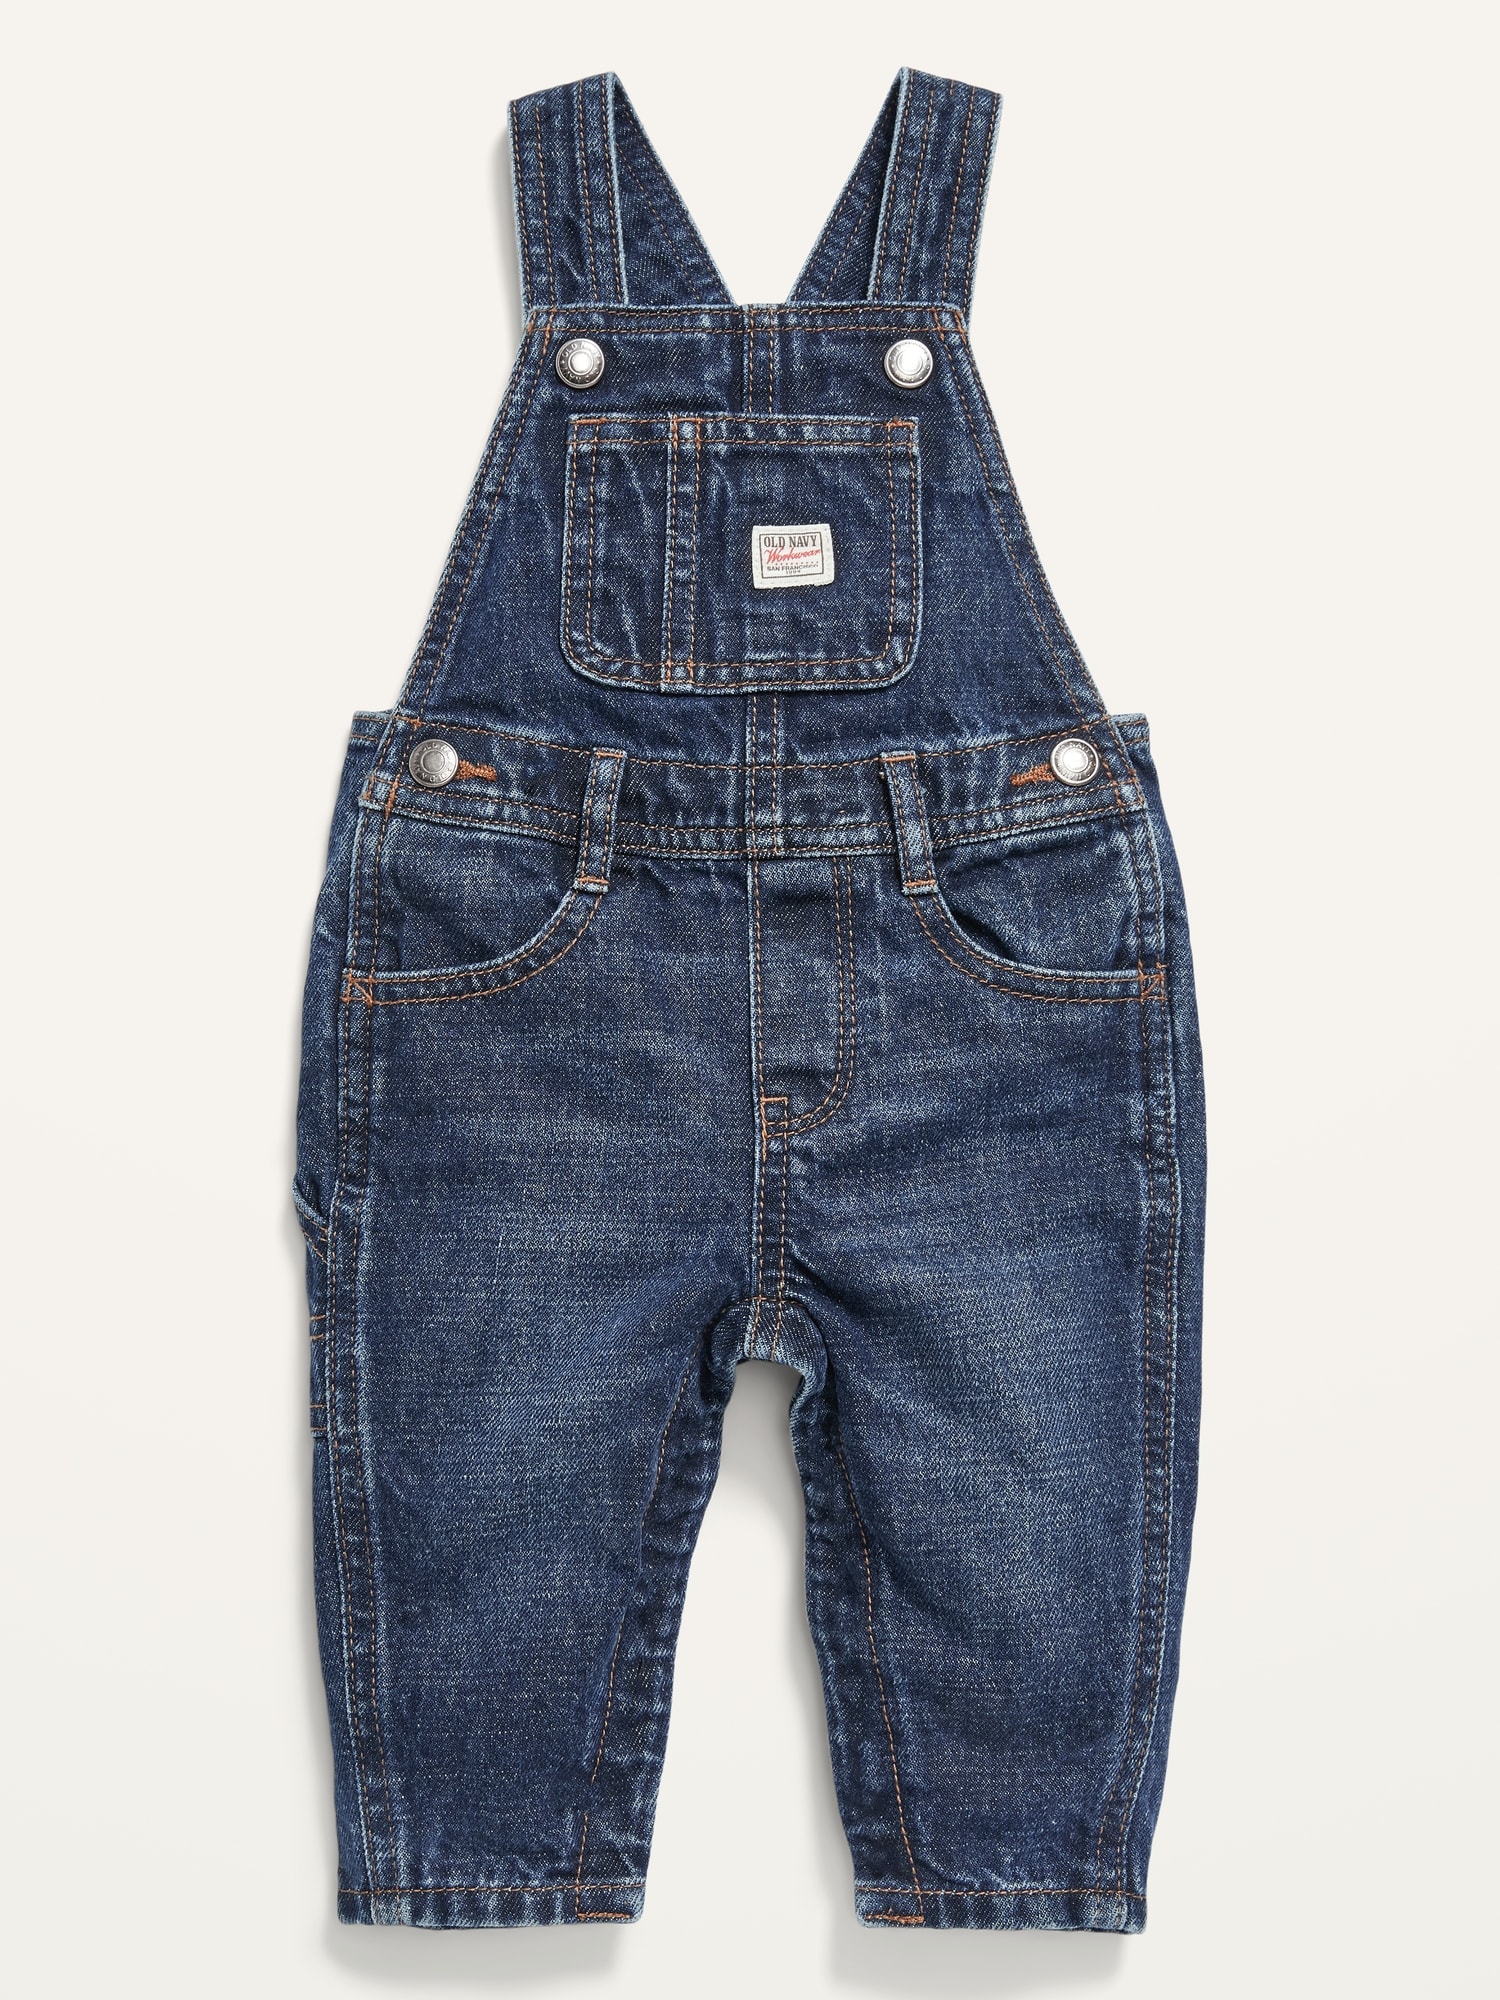 Unisex Workwear Jean Overalls for Baby Hot Deal